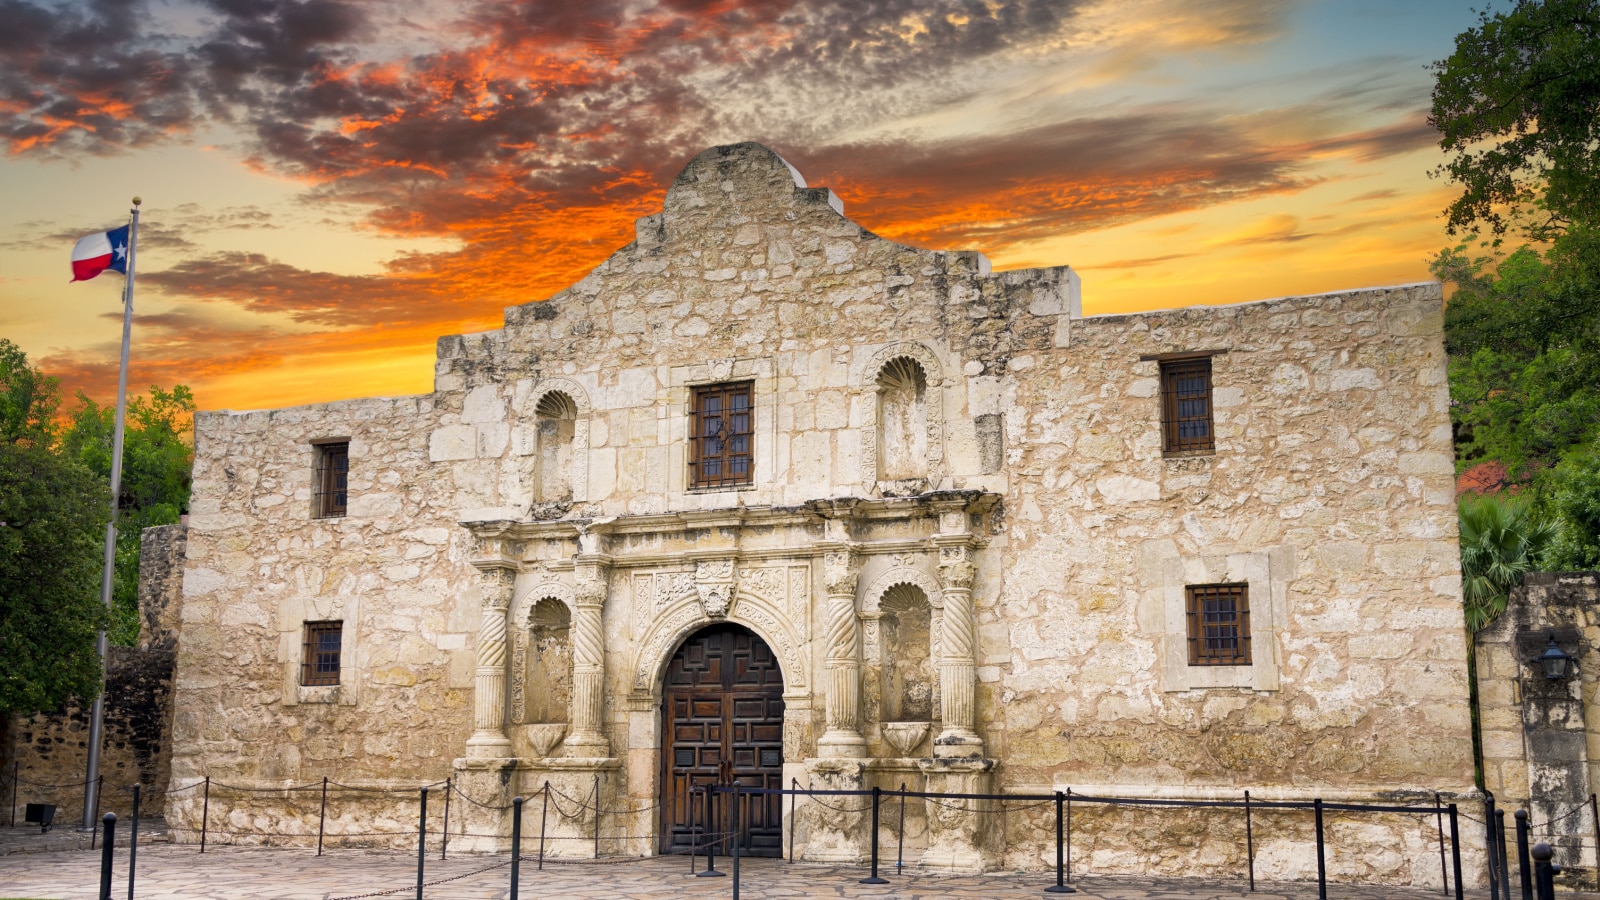 <p>Located in San Antonio, the Alamo is a must-visit to explore the historic mission and the famous battle for Texas independence.</p>